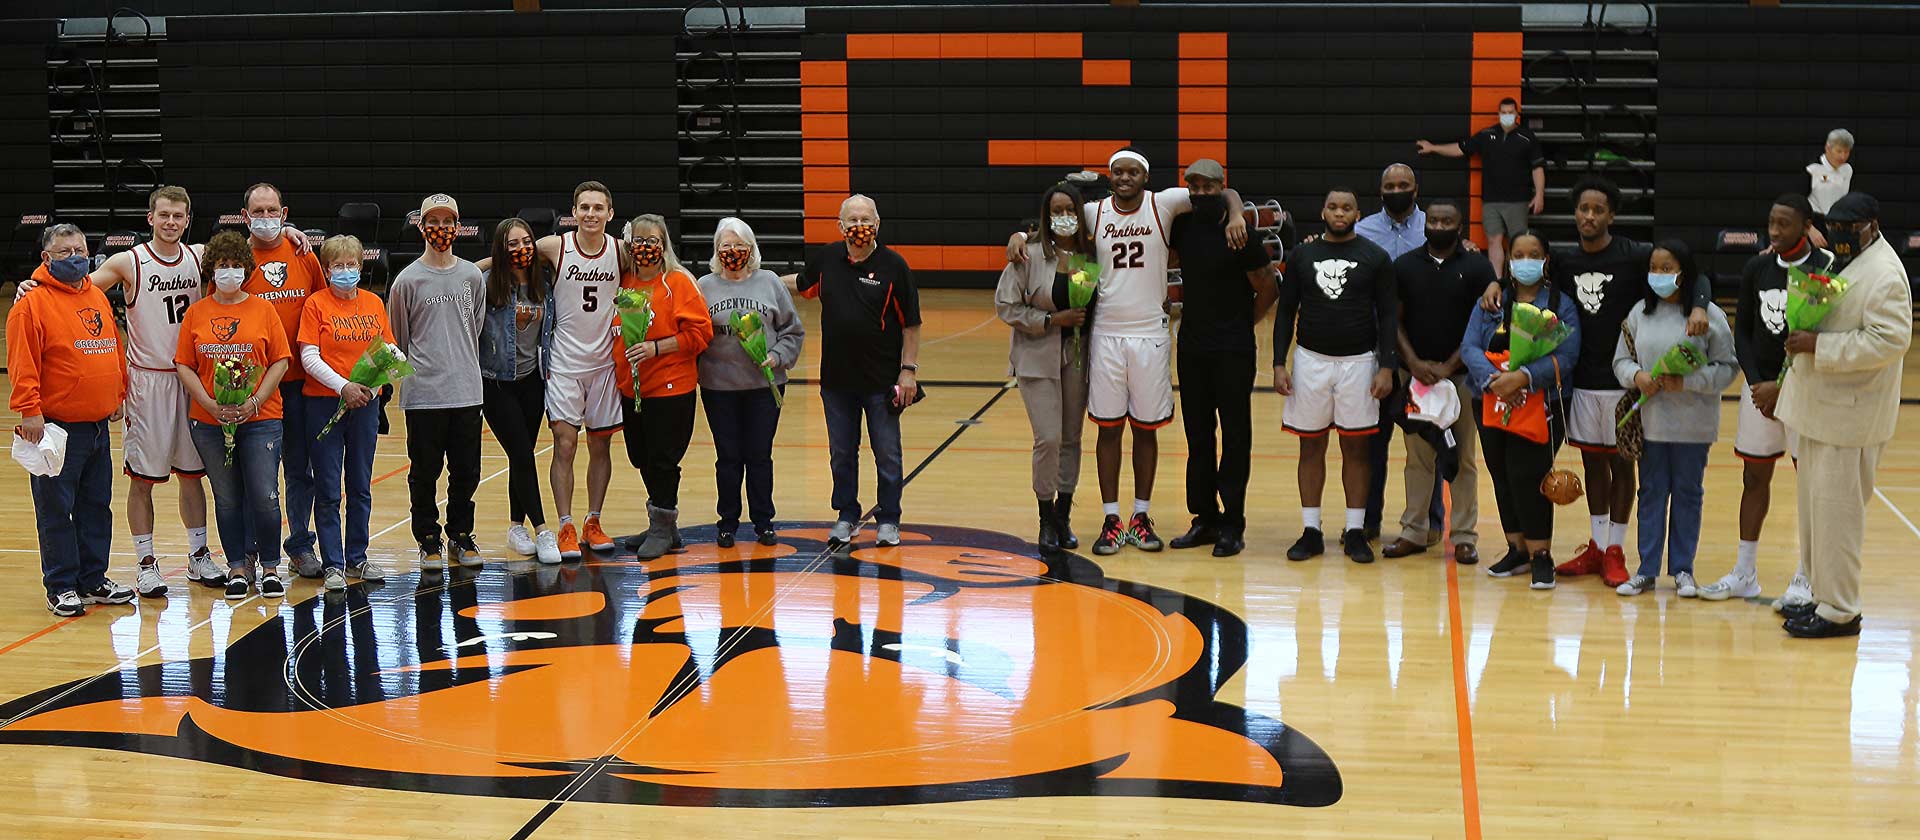 Men's basketball sends off seniors with 146-130 win over Spalding